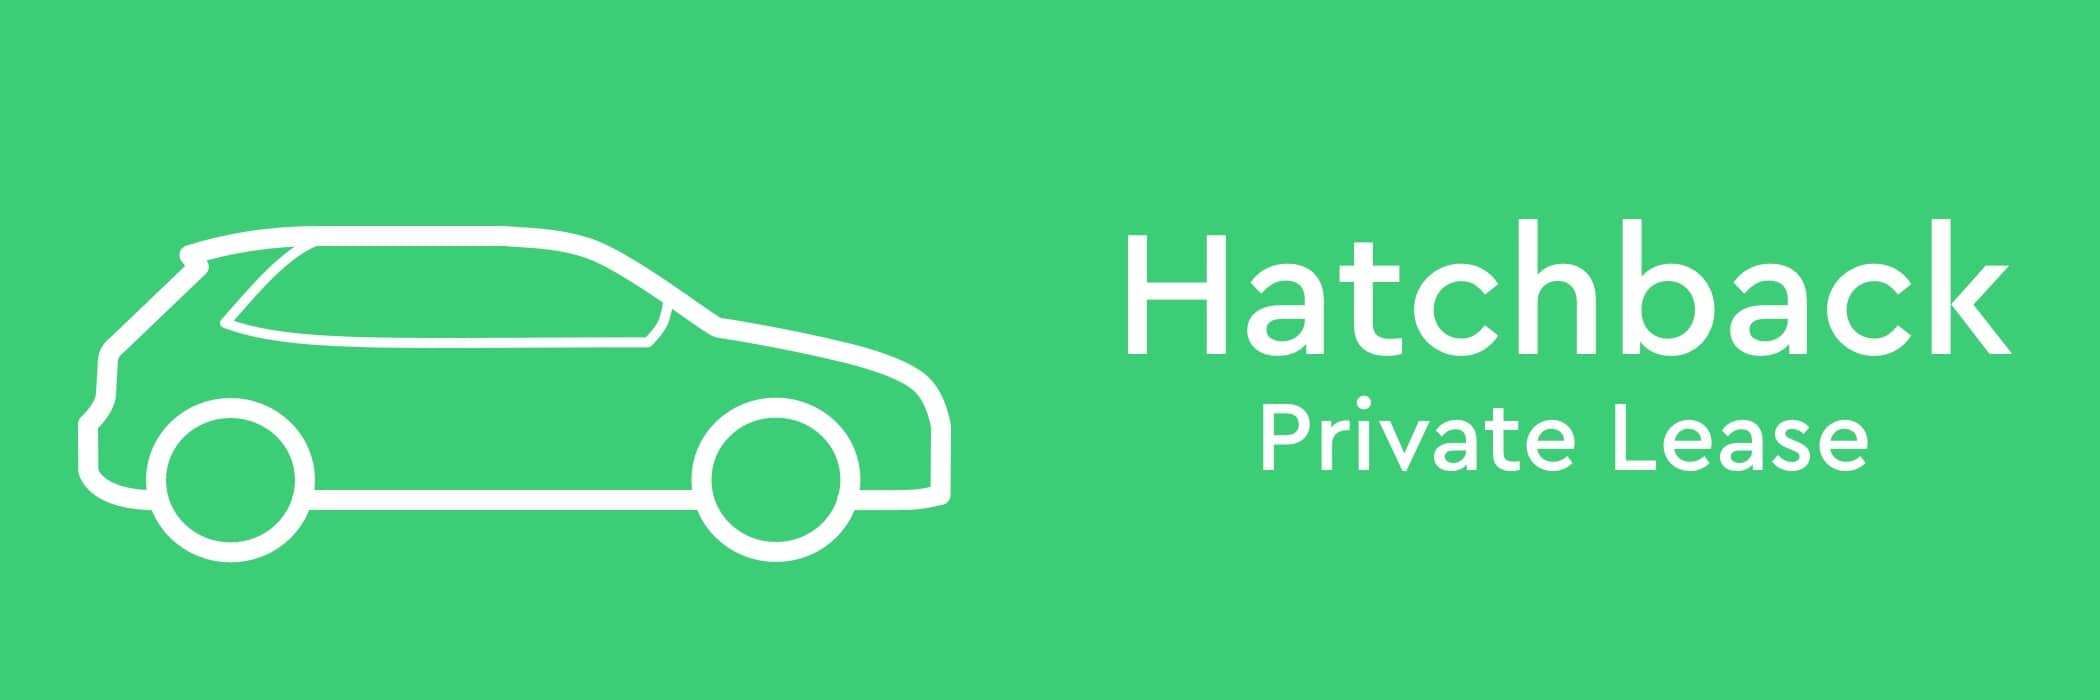 hatchback private lease auto